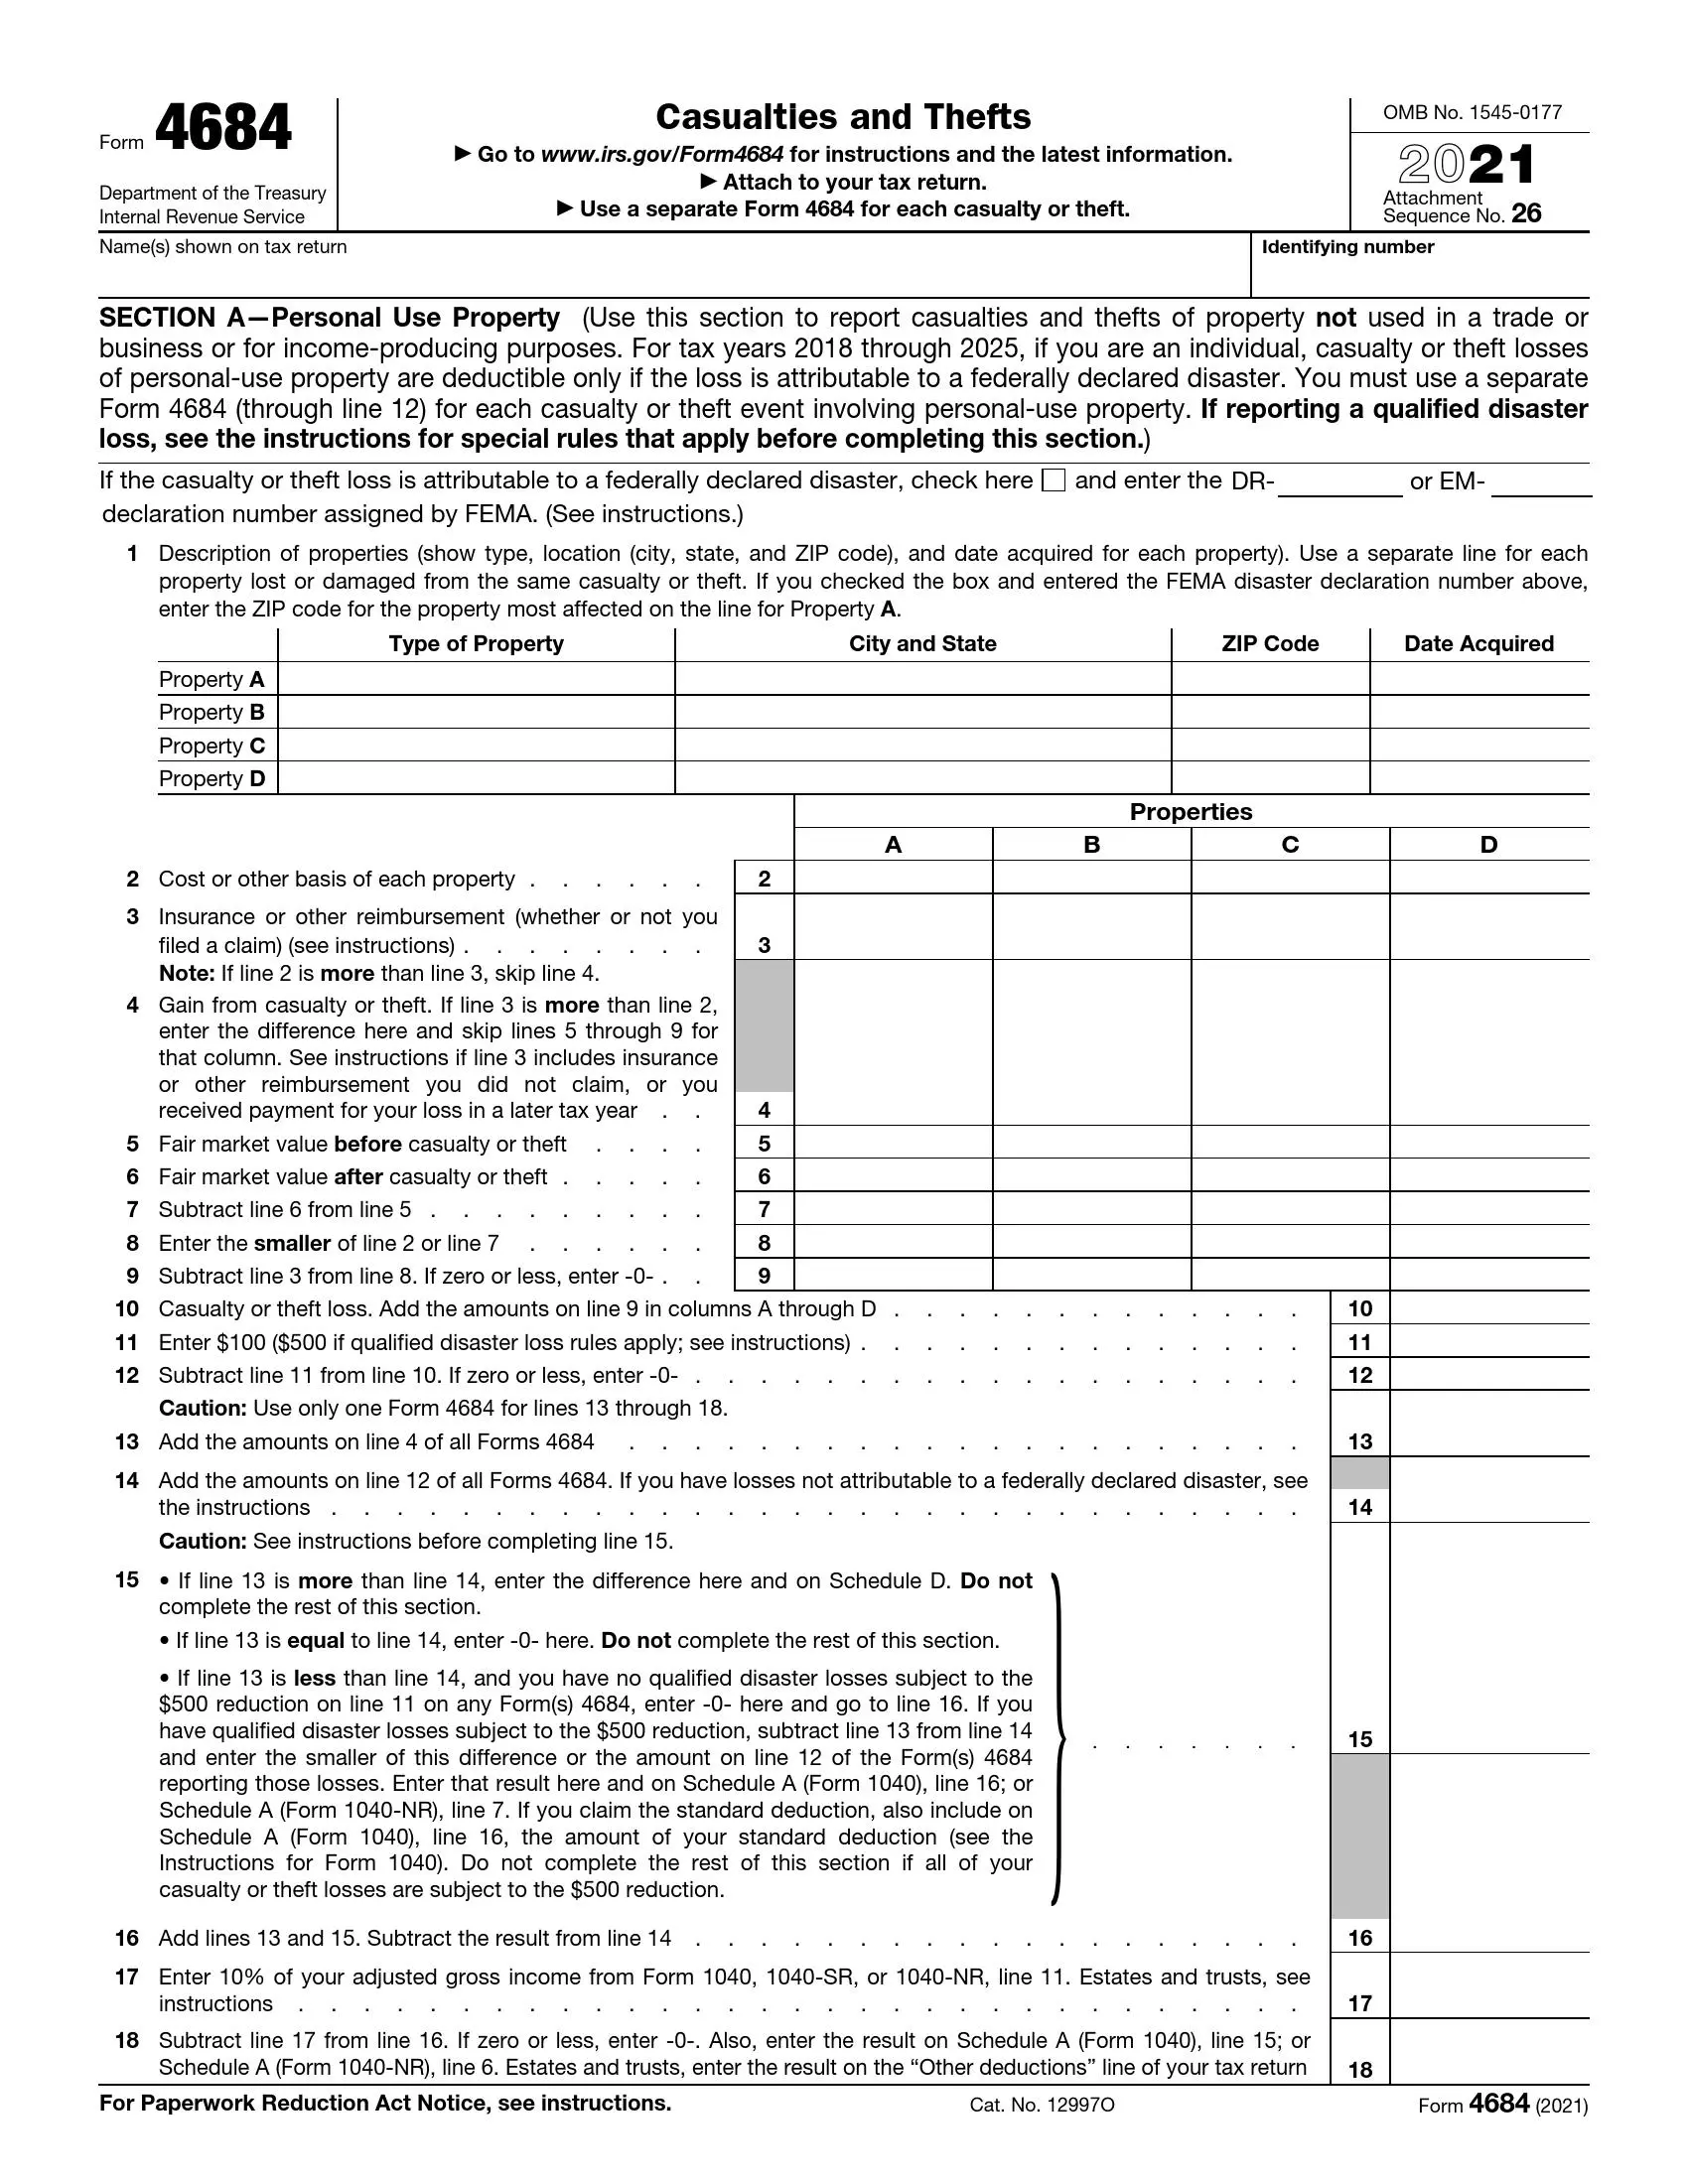 irs form 4684 2021 preview